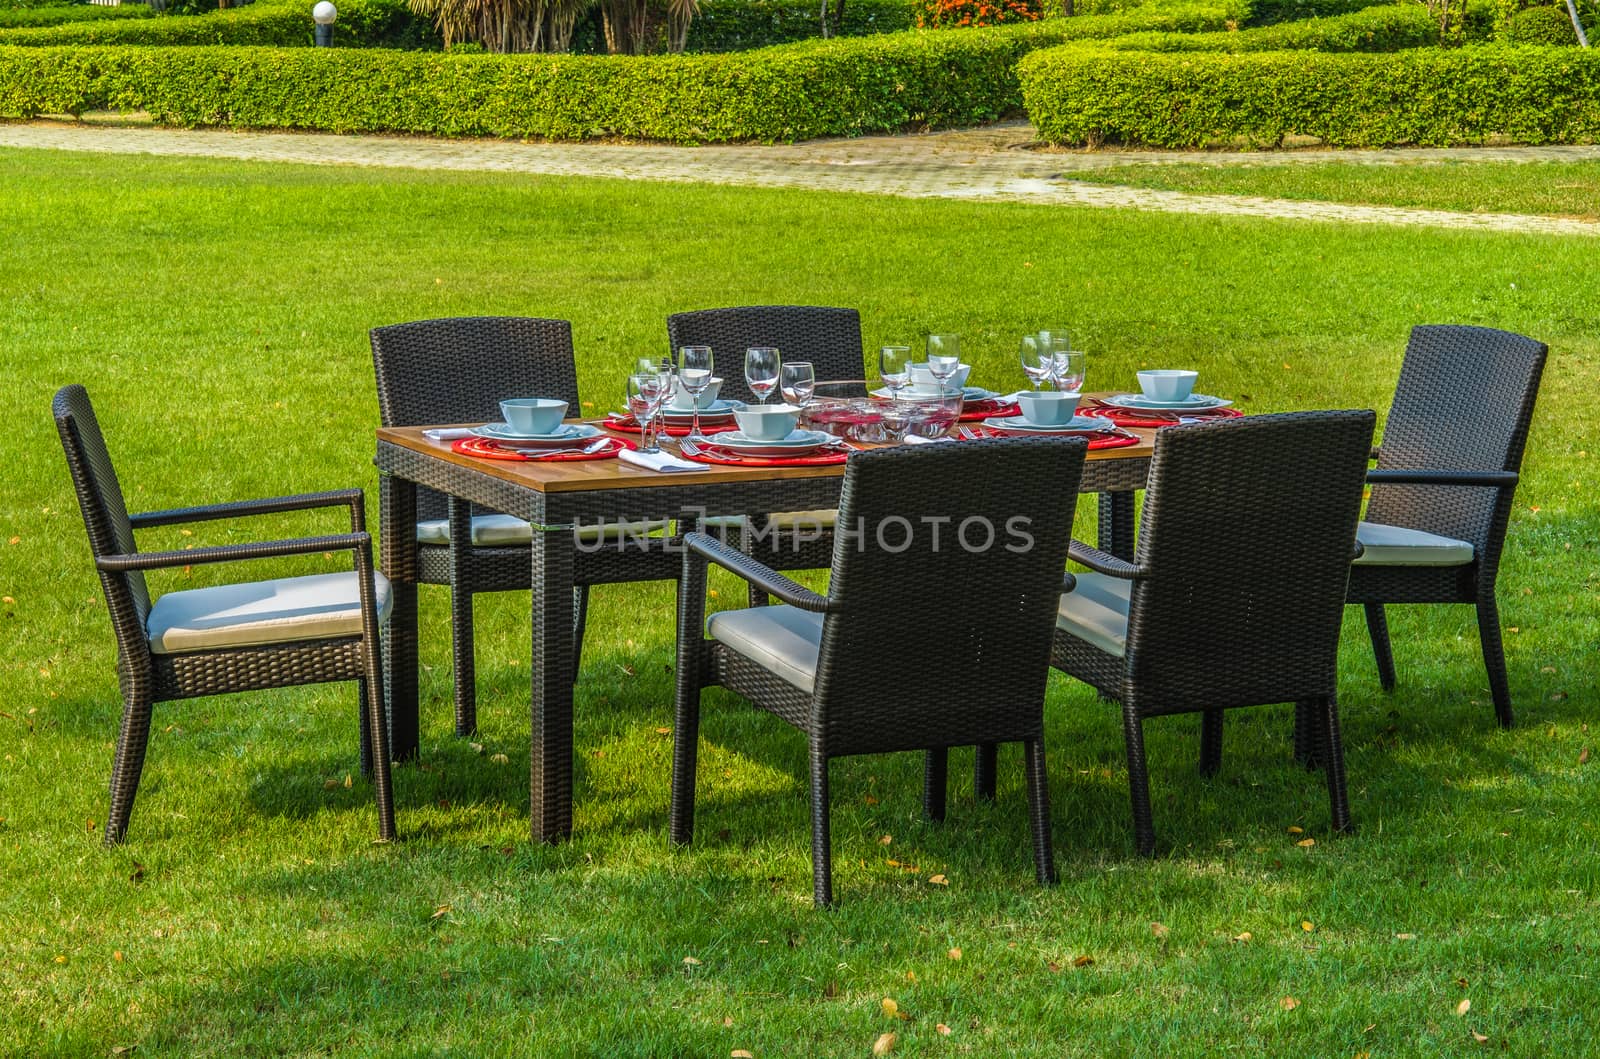 Water resistant outdoor rattan furniture, table, chairs and outdoor cushions